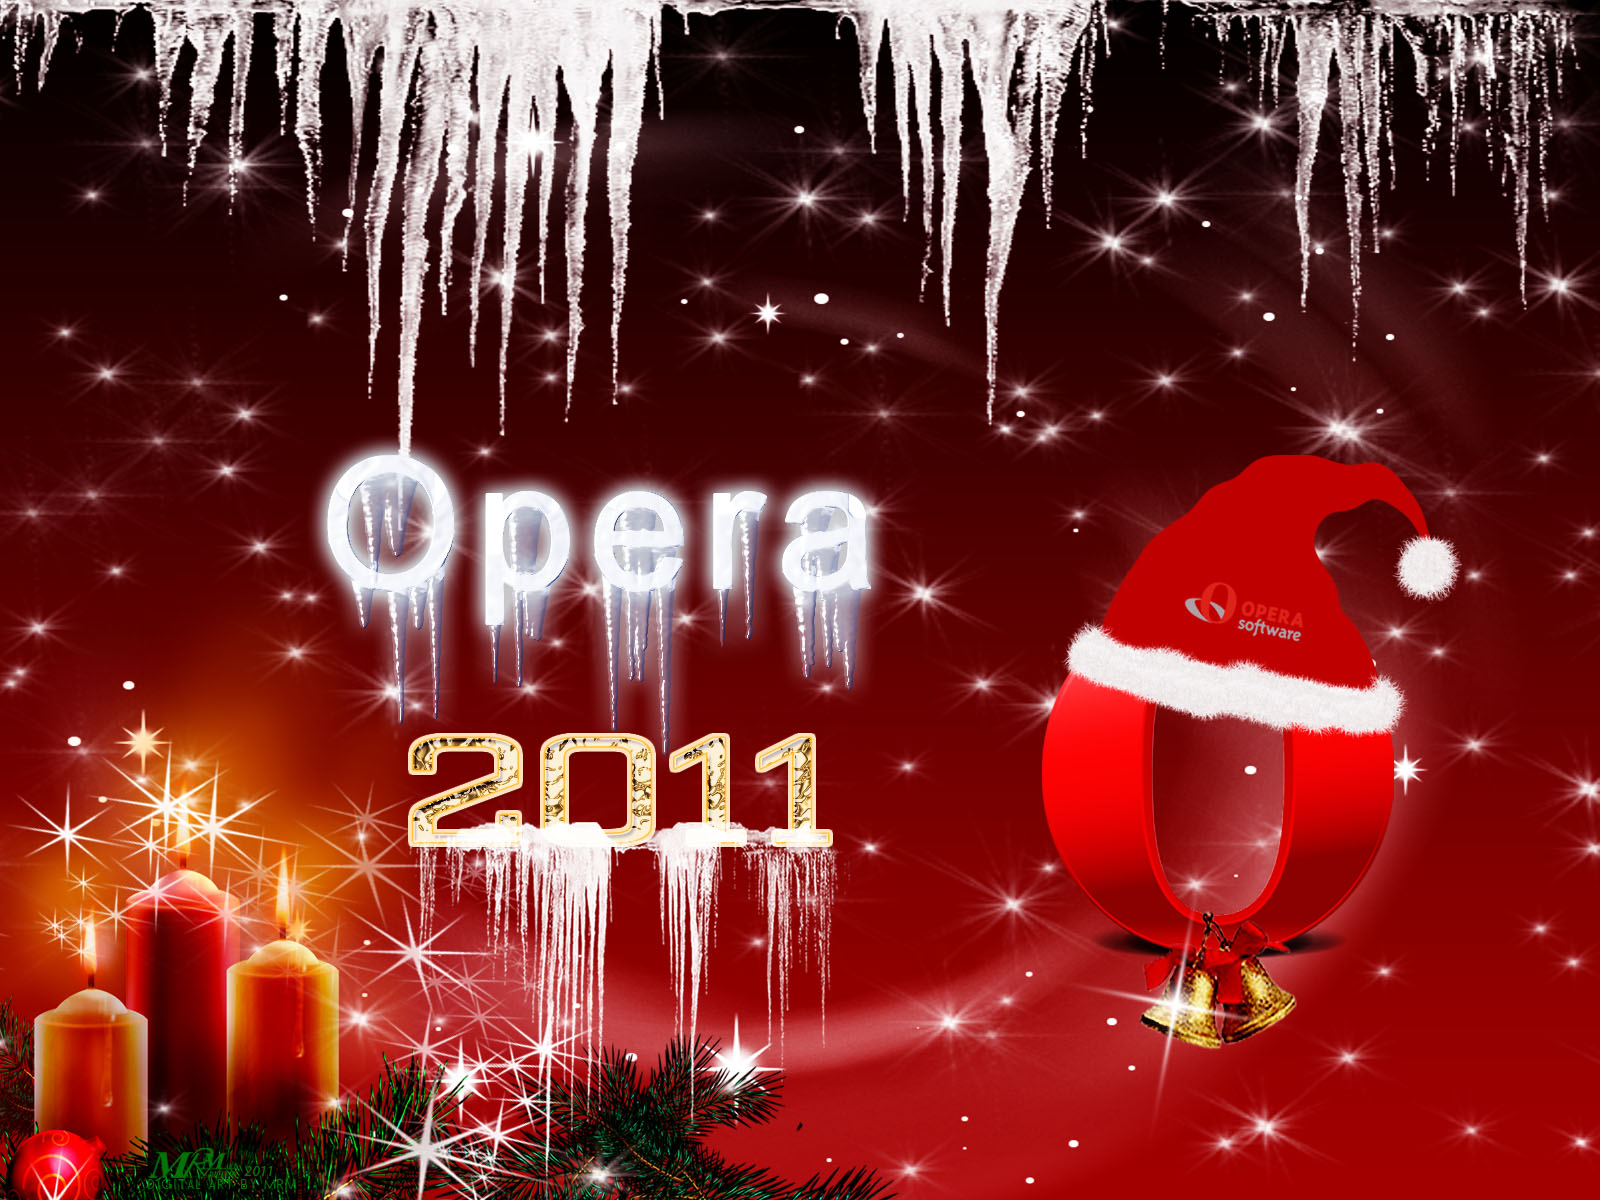 Posted by Admin at 7:52 AM Labels: New Year Wallpapers 2011